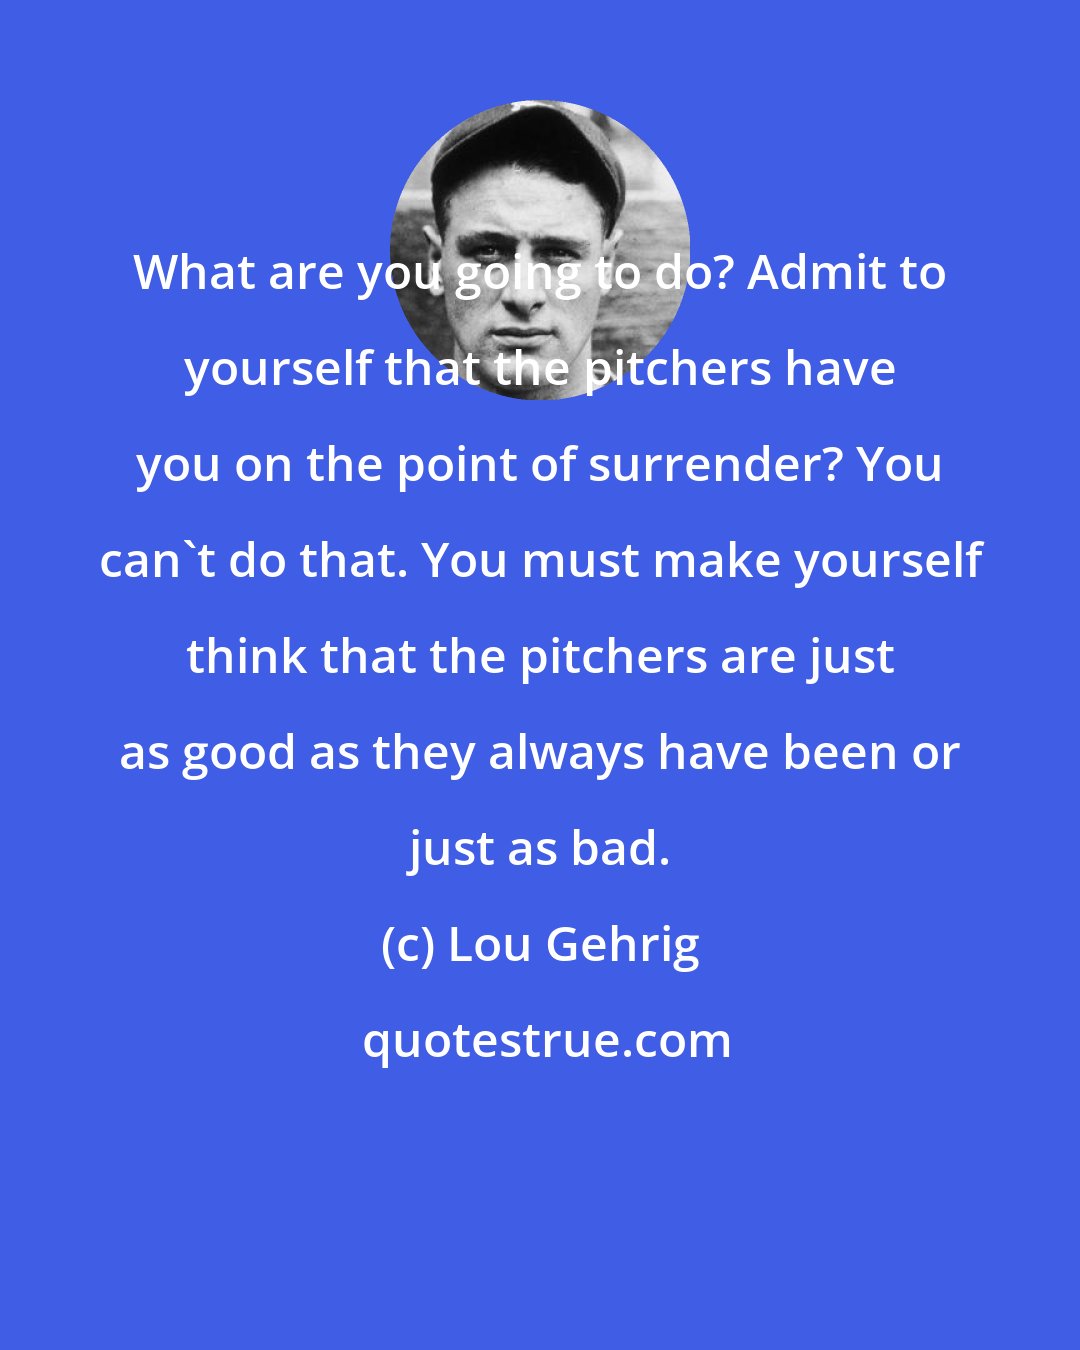 Lou Gehrig: What are you going to do? Admit to yourself that the pitchers have you on the point of surrender? You can't do that. You must make yourself think that the pitchers are just as good as they always have been or just as bad.